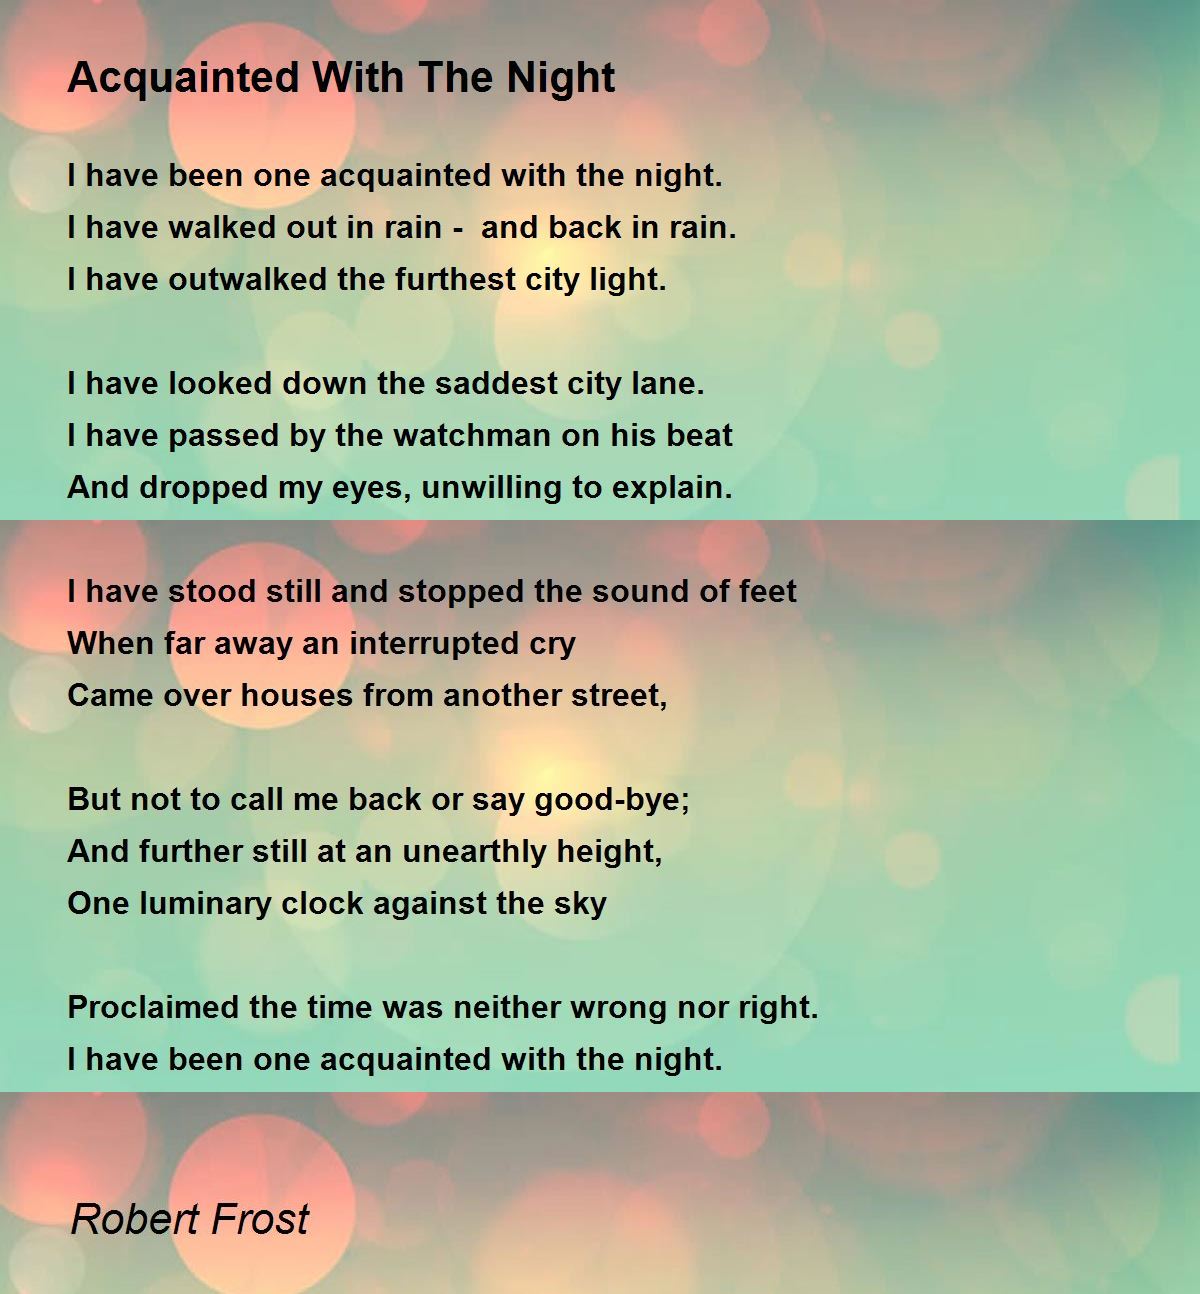 robert frost acquainted with the night analysis